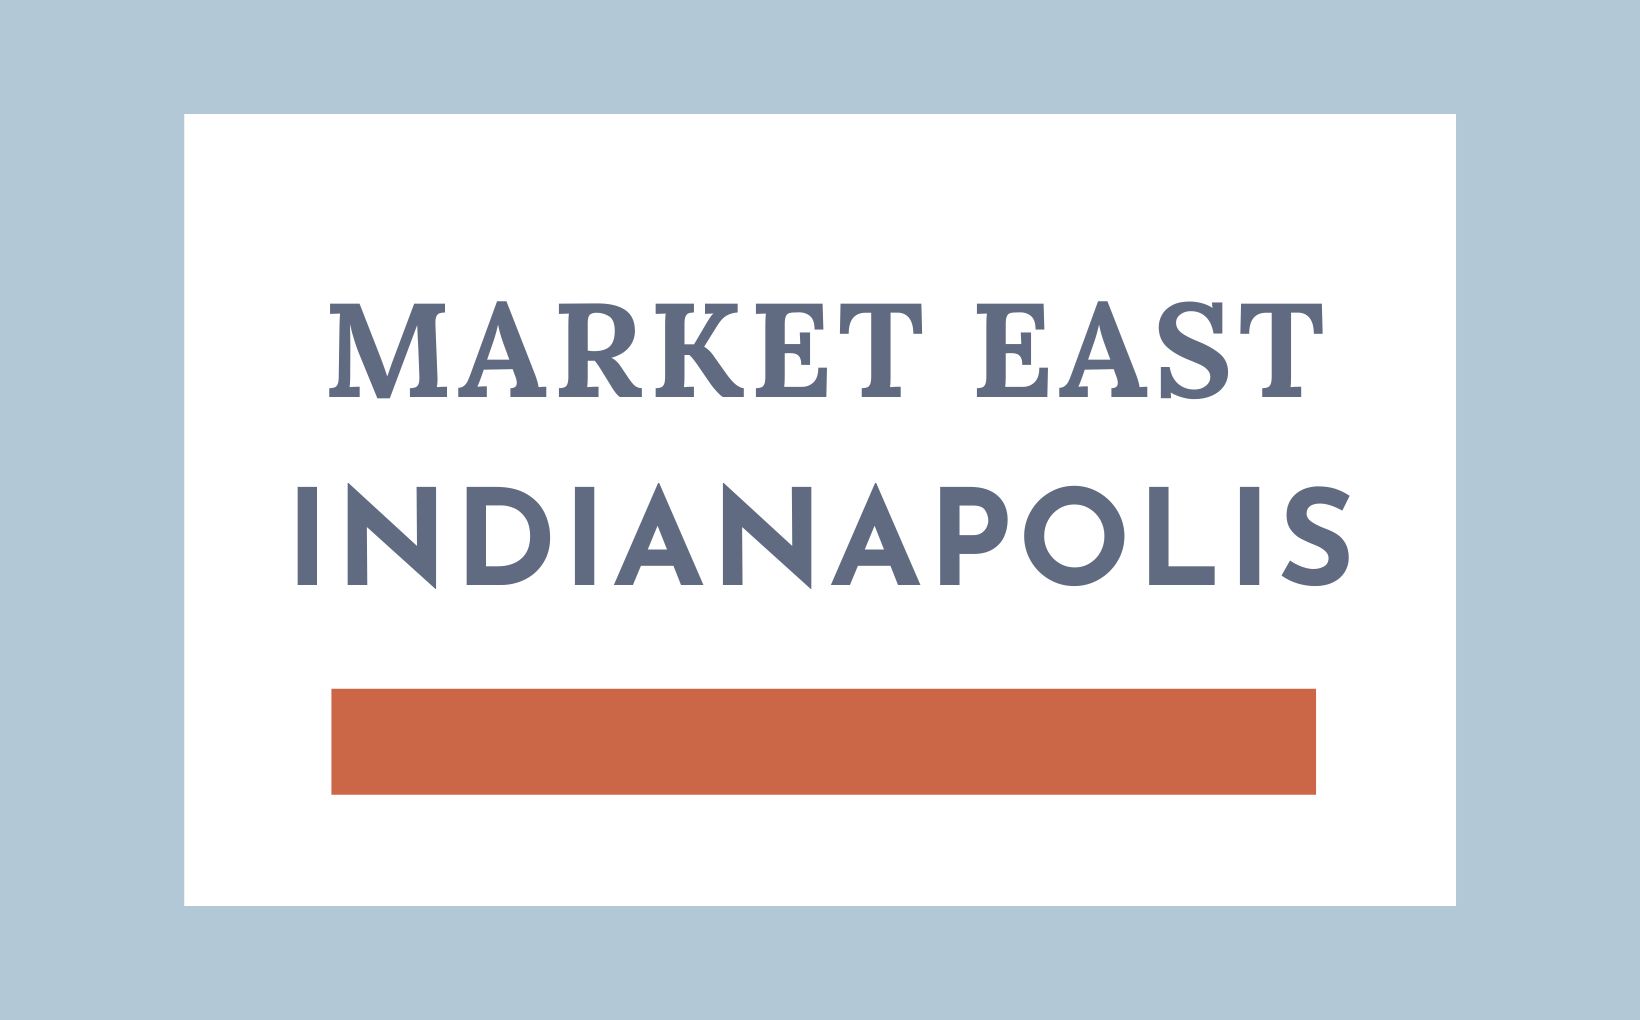 New Indianapolis cultural hub Market East feature image